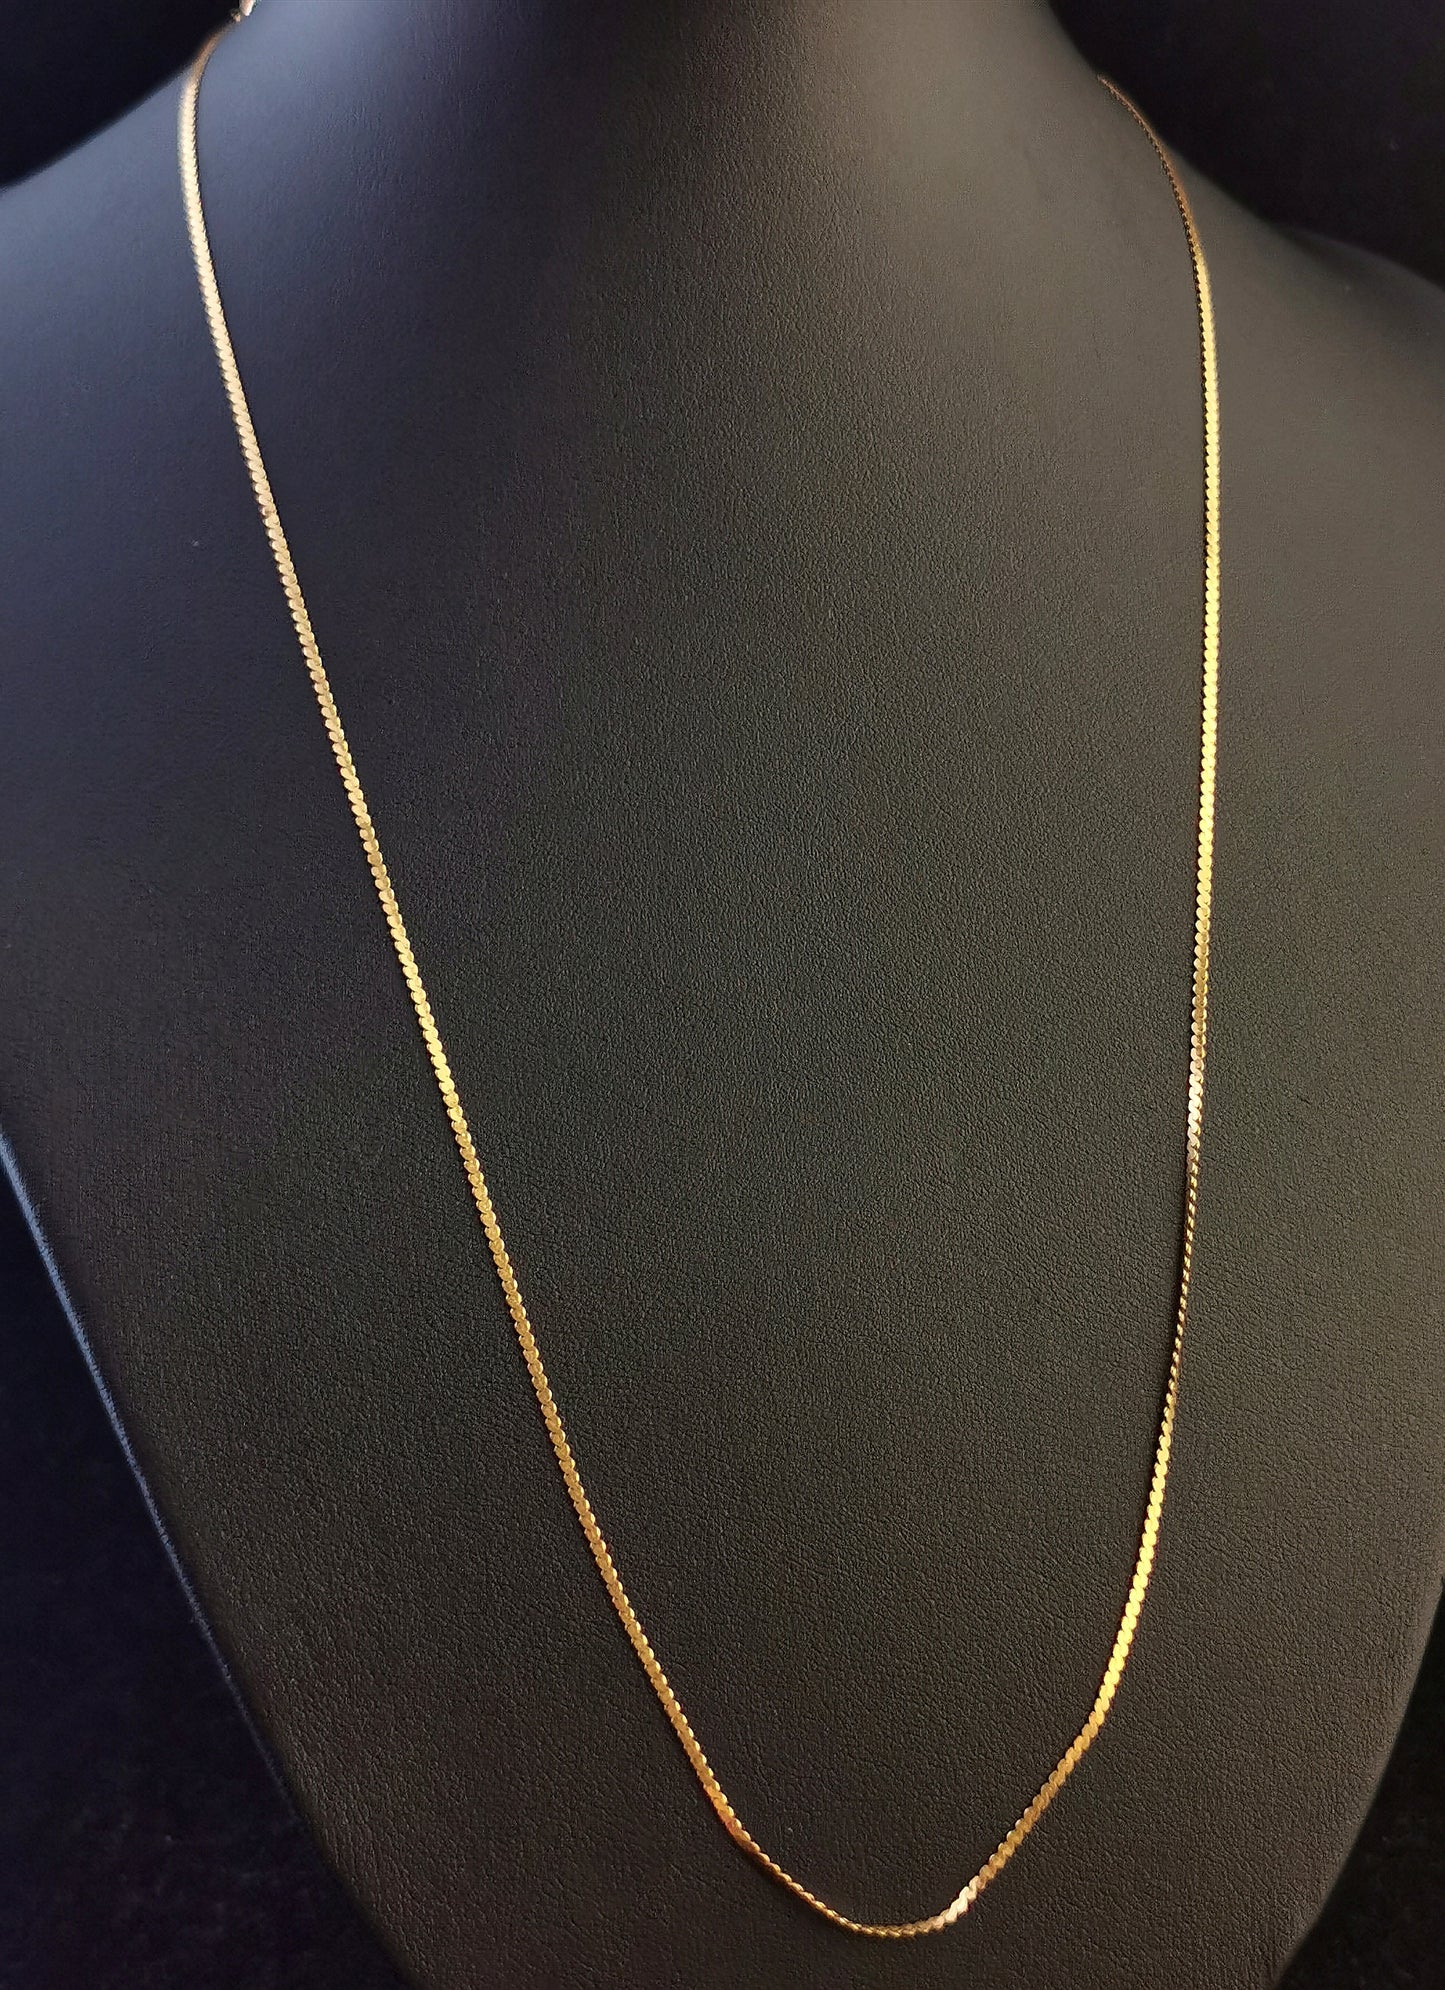 Vintage 9ct yellow gold chain necklace, wavy herringbone link, 1970s, 24 inch